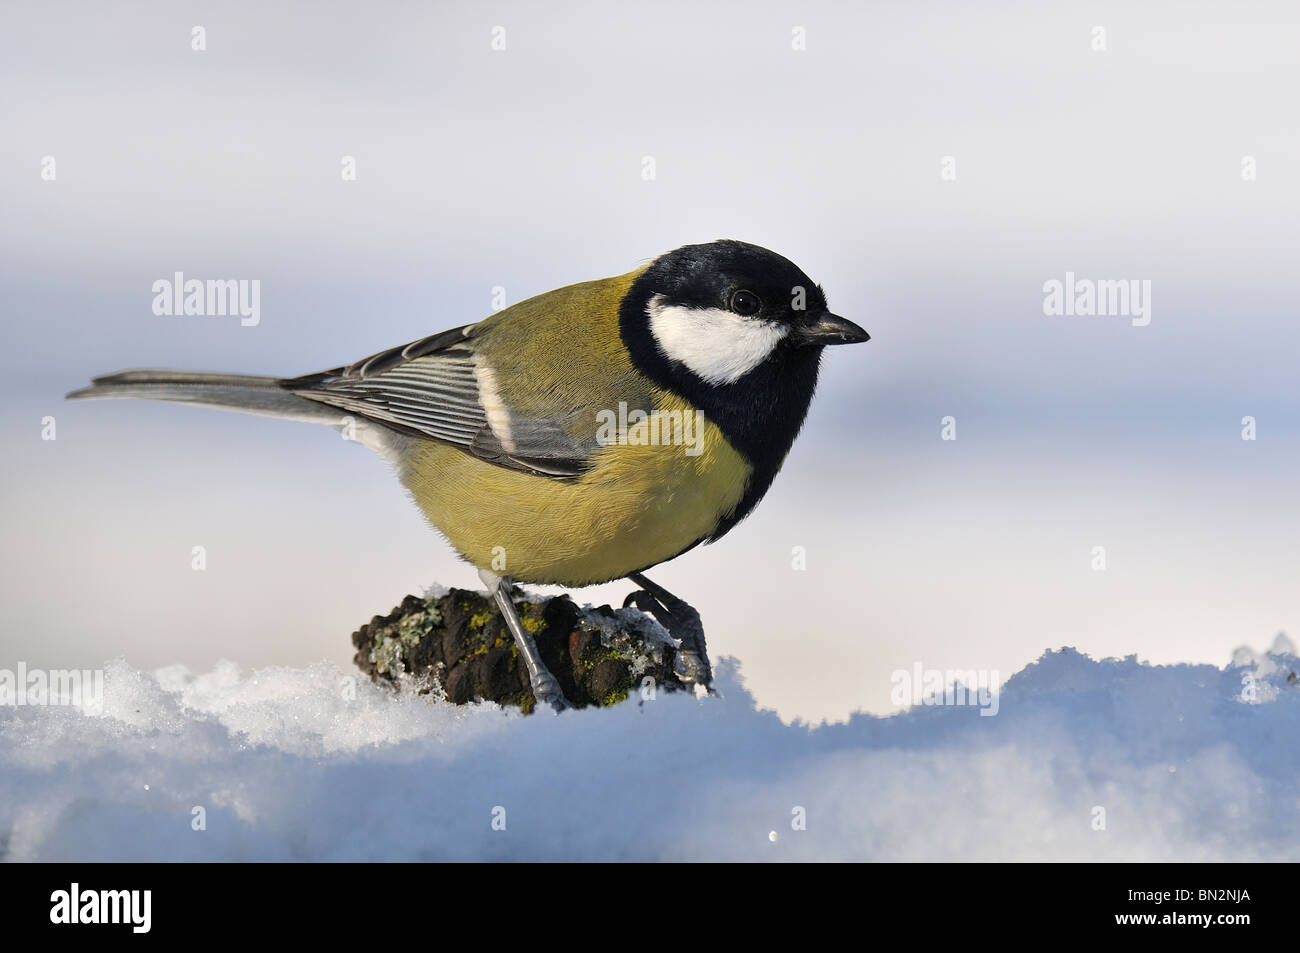 Great Tit (Parus major) after the snowfall on a pineapple in the soil. Stock Photo